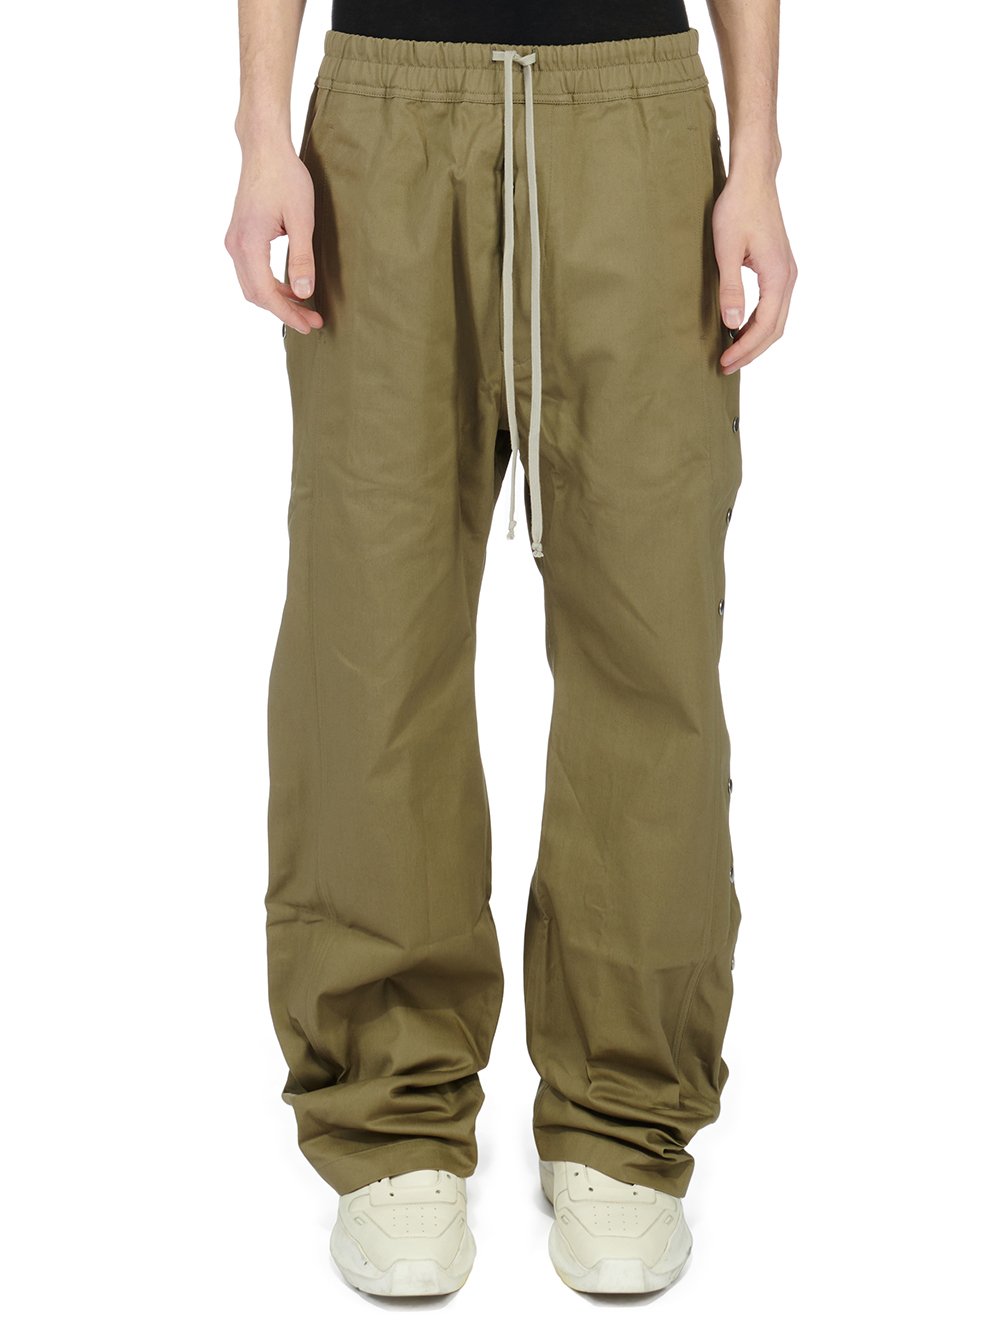 RICK OWENS FW23 LUXOR PUSHER PANTS IN PALE GREEN COTTON TWILL